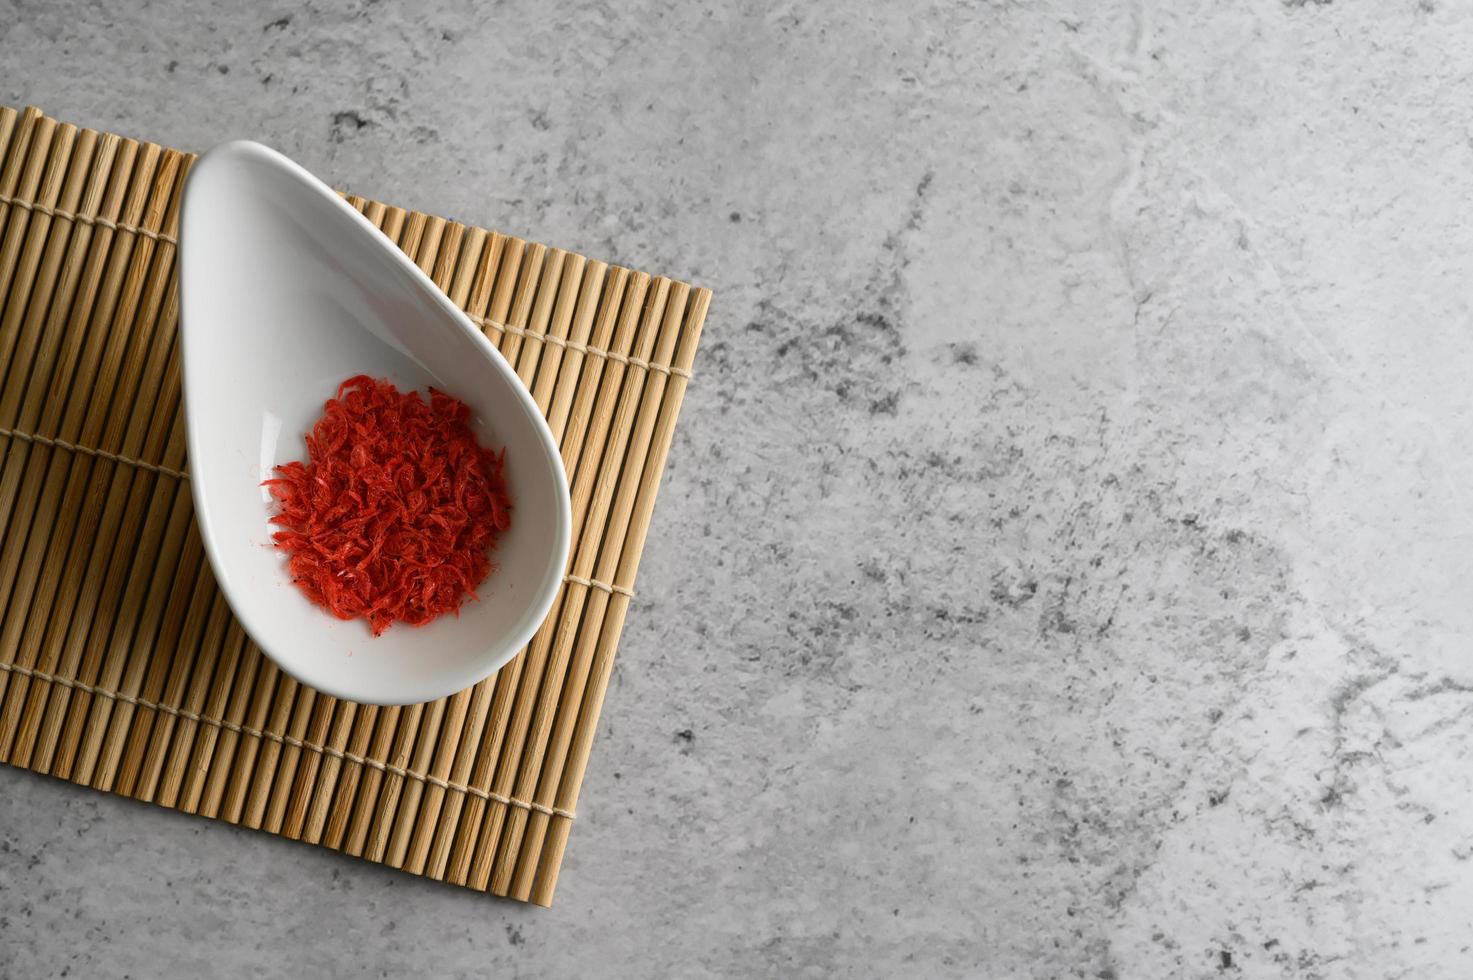 Small red dried shrimp in a cup on a wooden mat photo